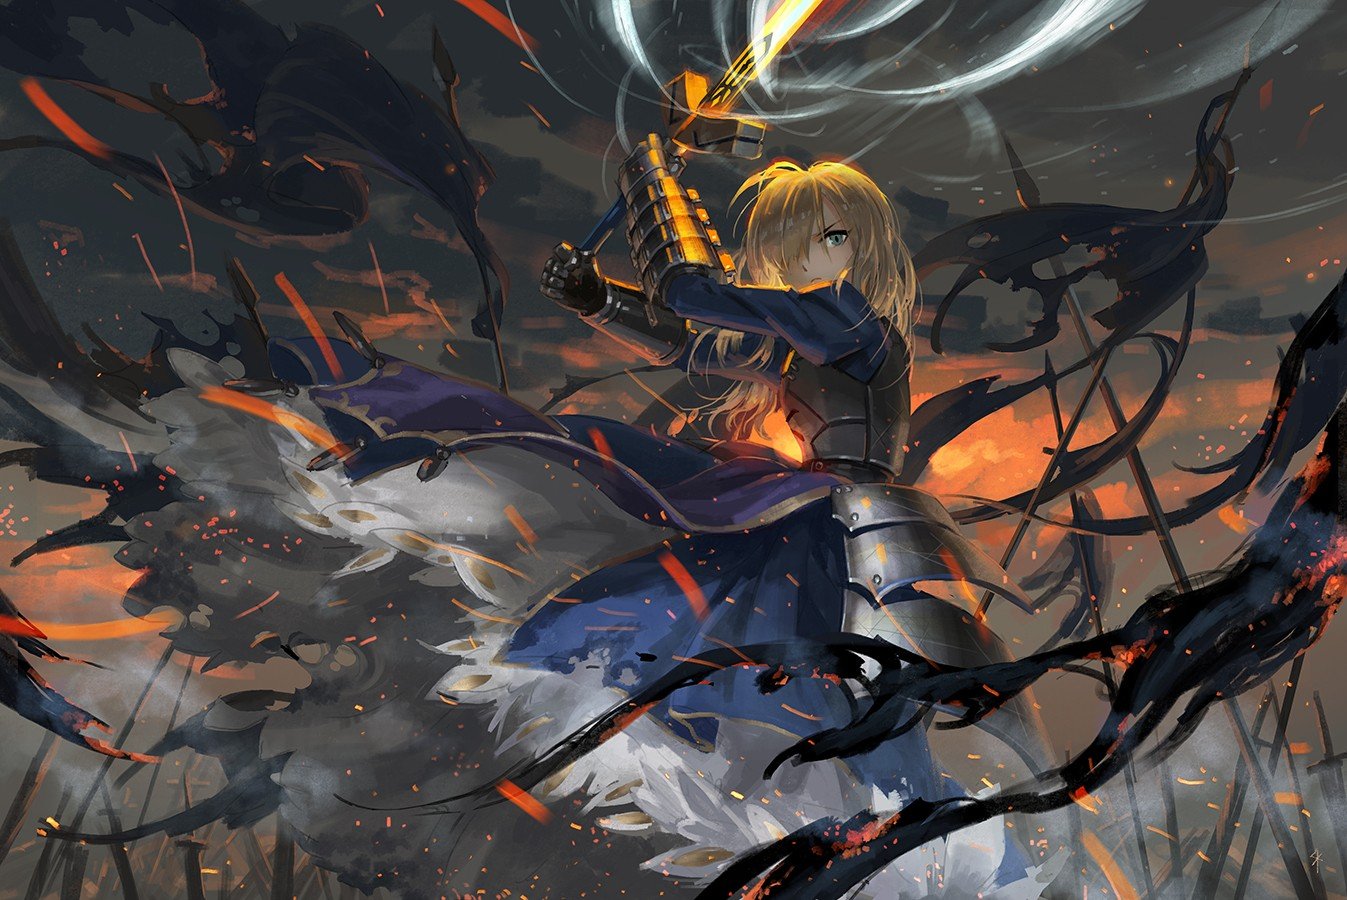 Saber Fate Series Wallpapers Hd Desktop And Mobile Backgrounds